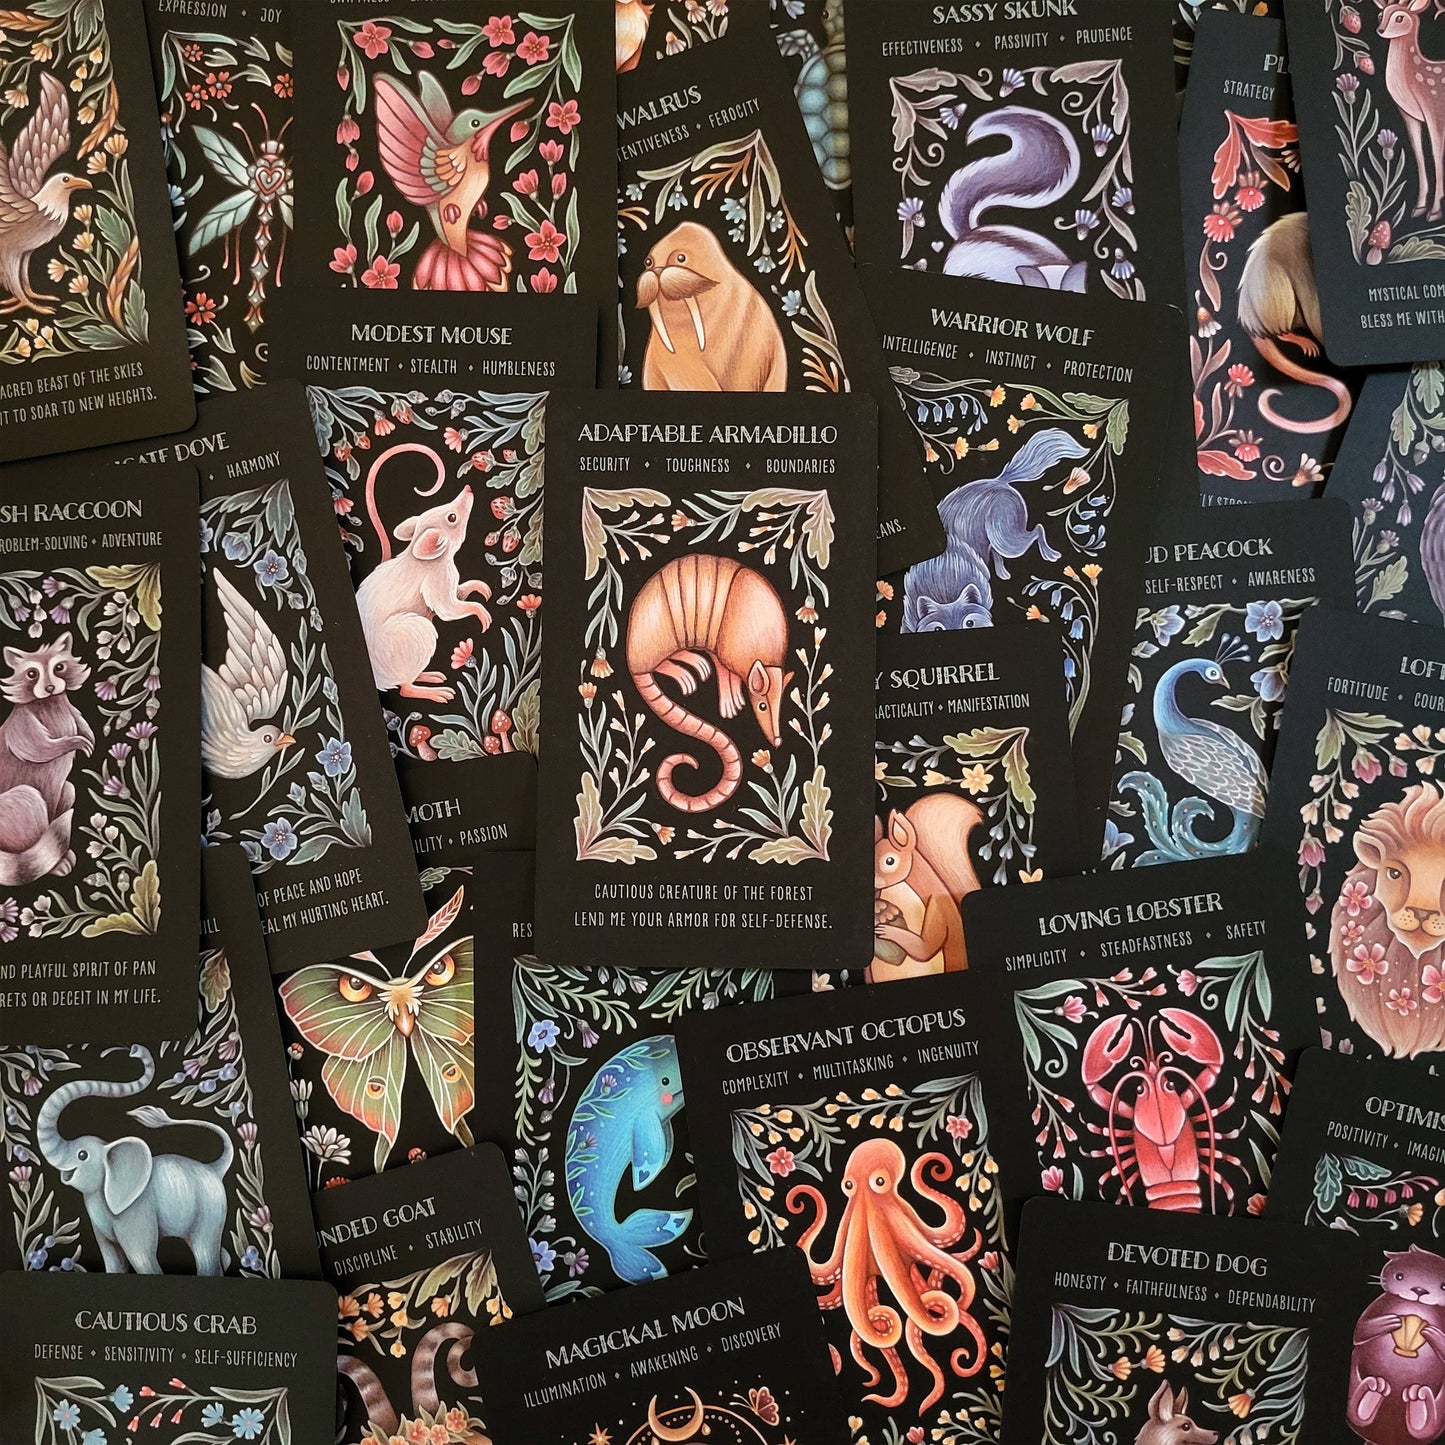 Wild Whiskers Oracle Deck - Spirit Animal Divination Cards